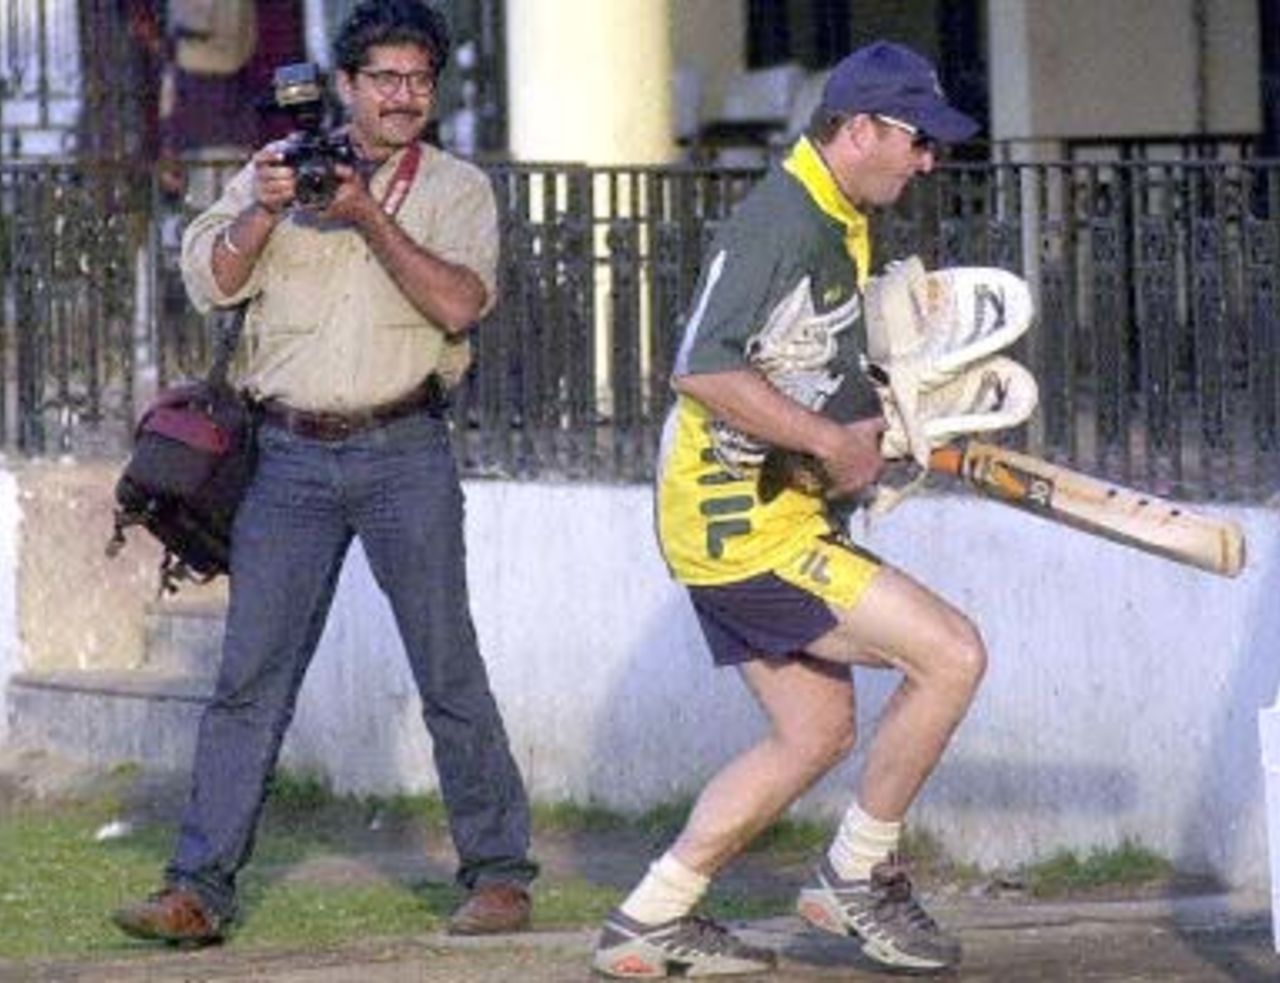 Australian star batsman Mark Waugh (R) runs away from photographers after a net practice session by the Australian team at Ferozshah Kotla ground in New Delhi, 04 March 2001. Australia will be playing India's Board President's XI team from 06 March 2001 after having already taken a 1-0 lead in the three Test match series against India.